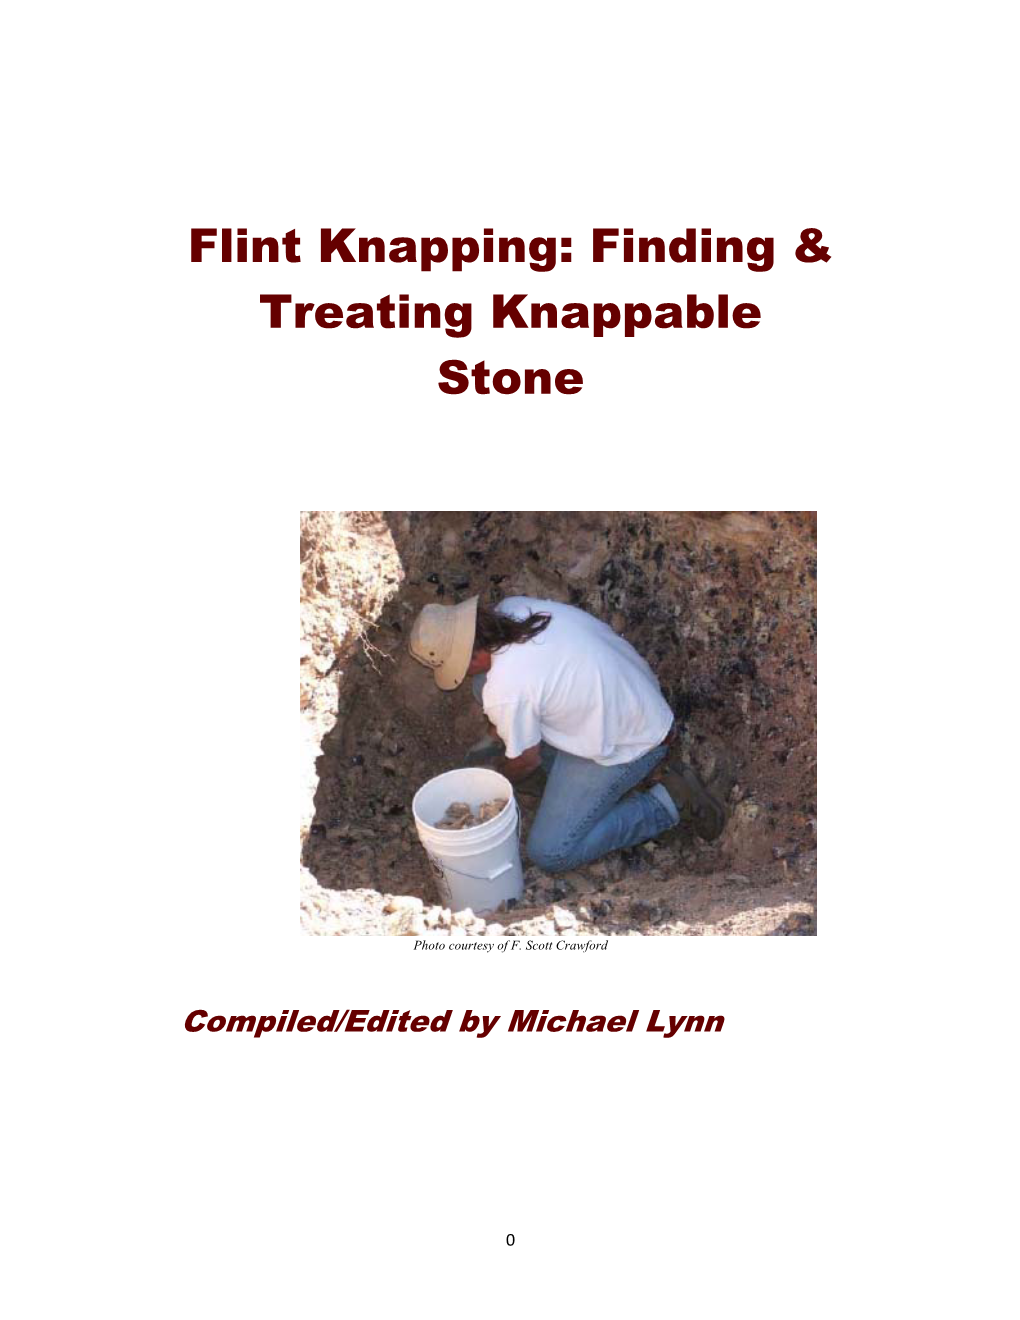 Finding & Treating Knappable Stone